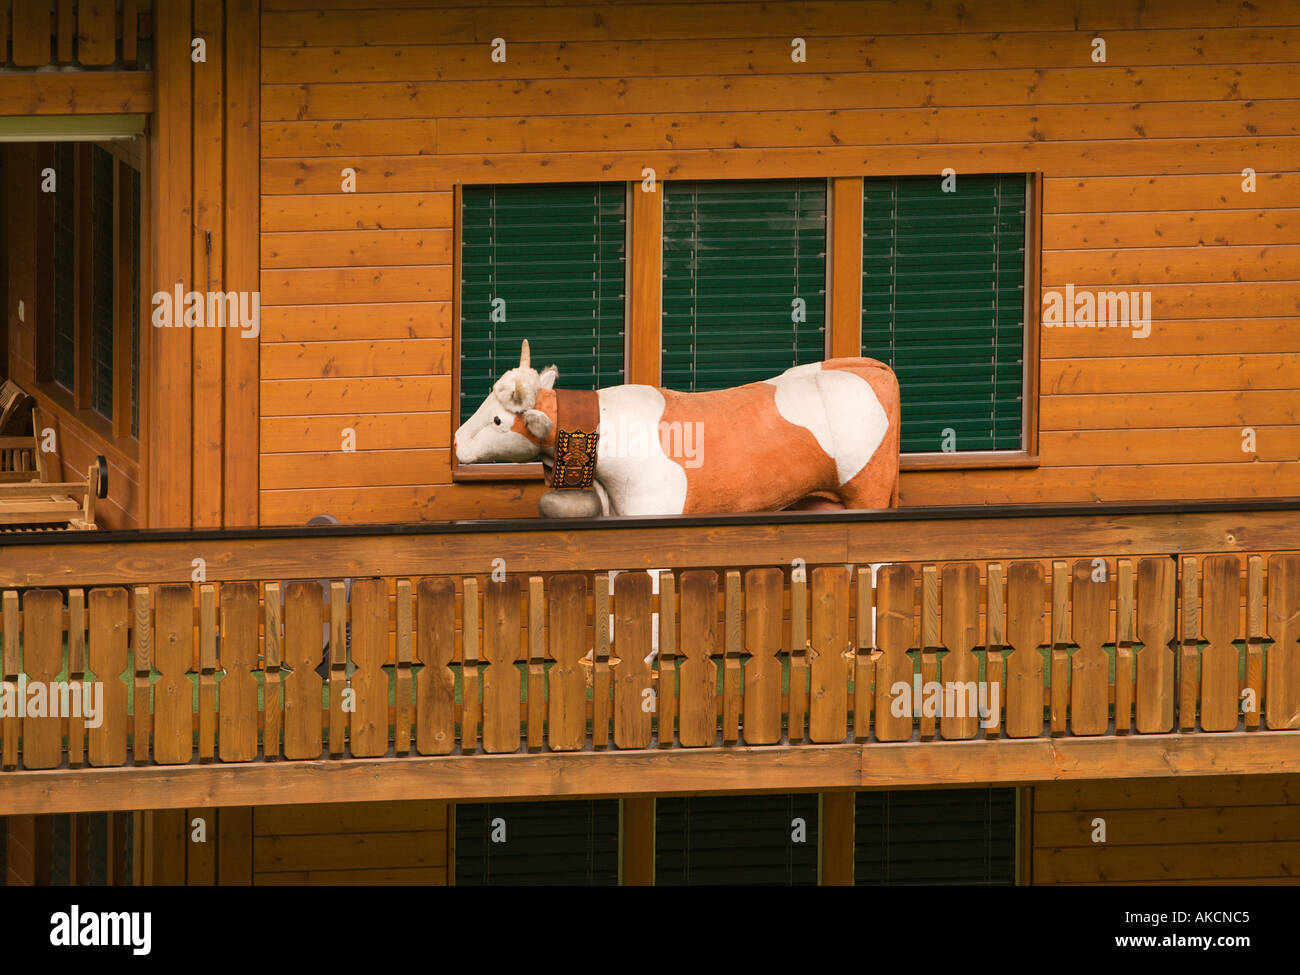 Life size model brown and white cow standing on the balcony of a wooden chalet in Zermatt Swiss Alps Valais Switzerland Stock Photo